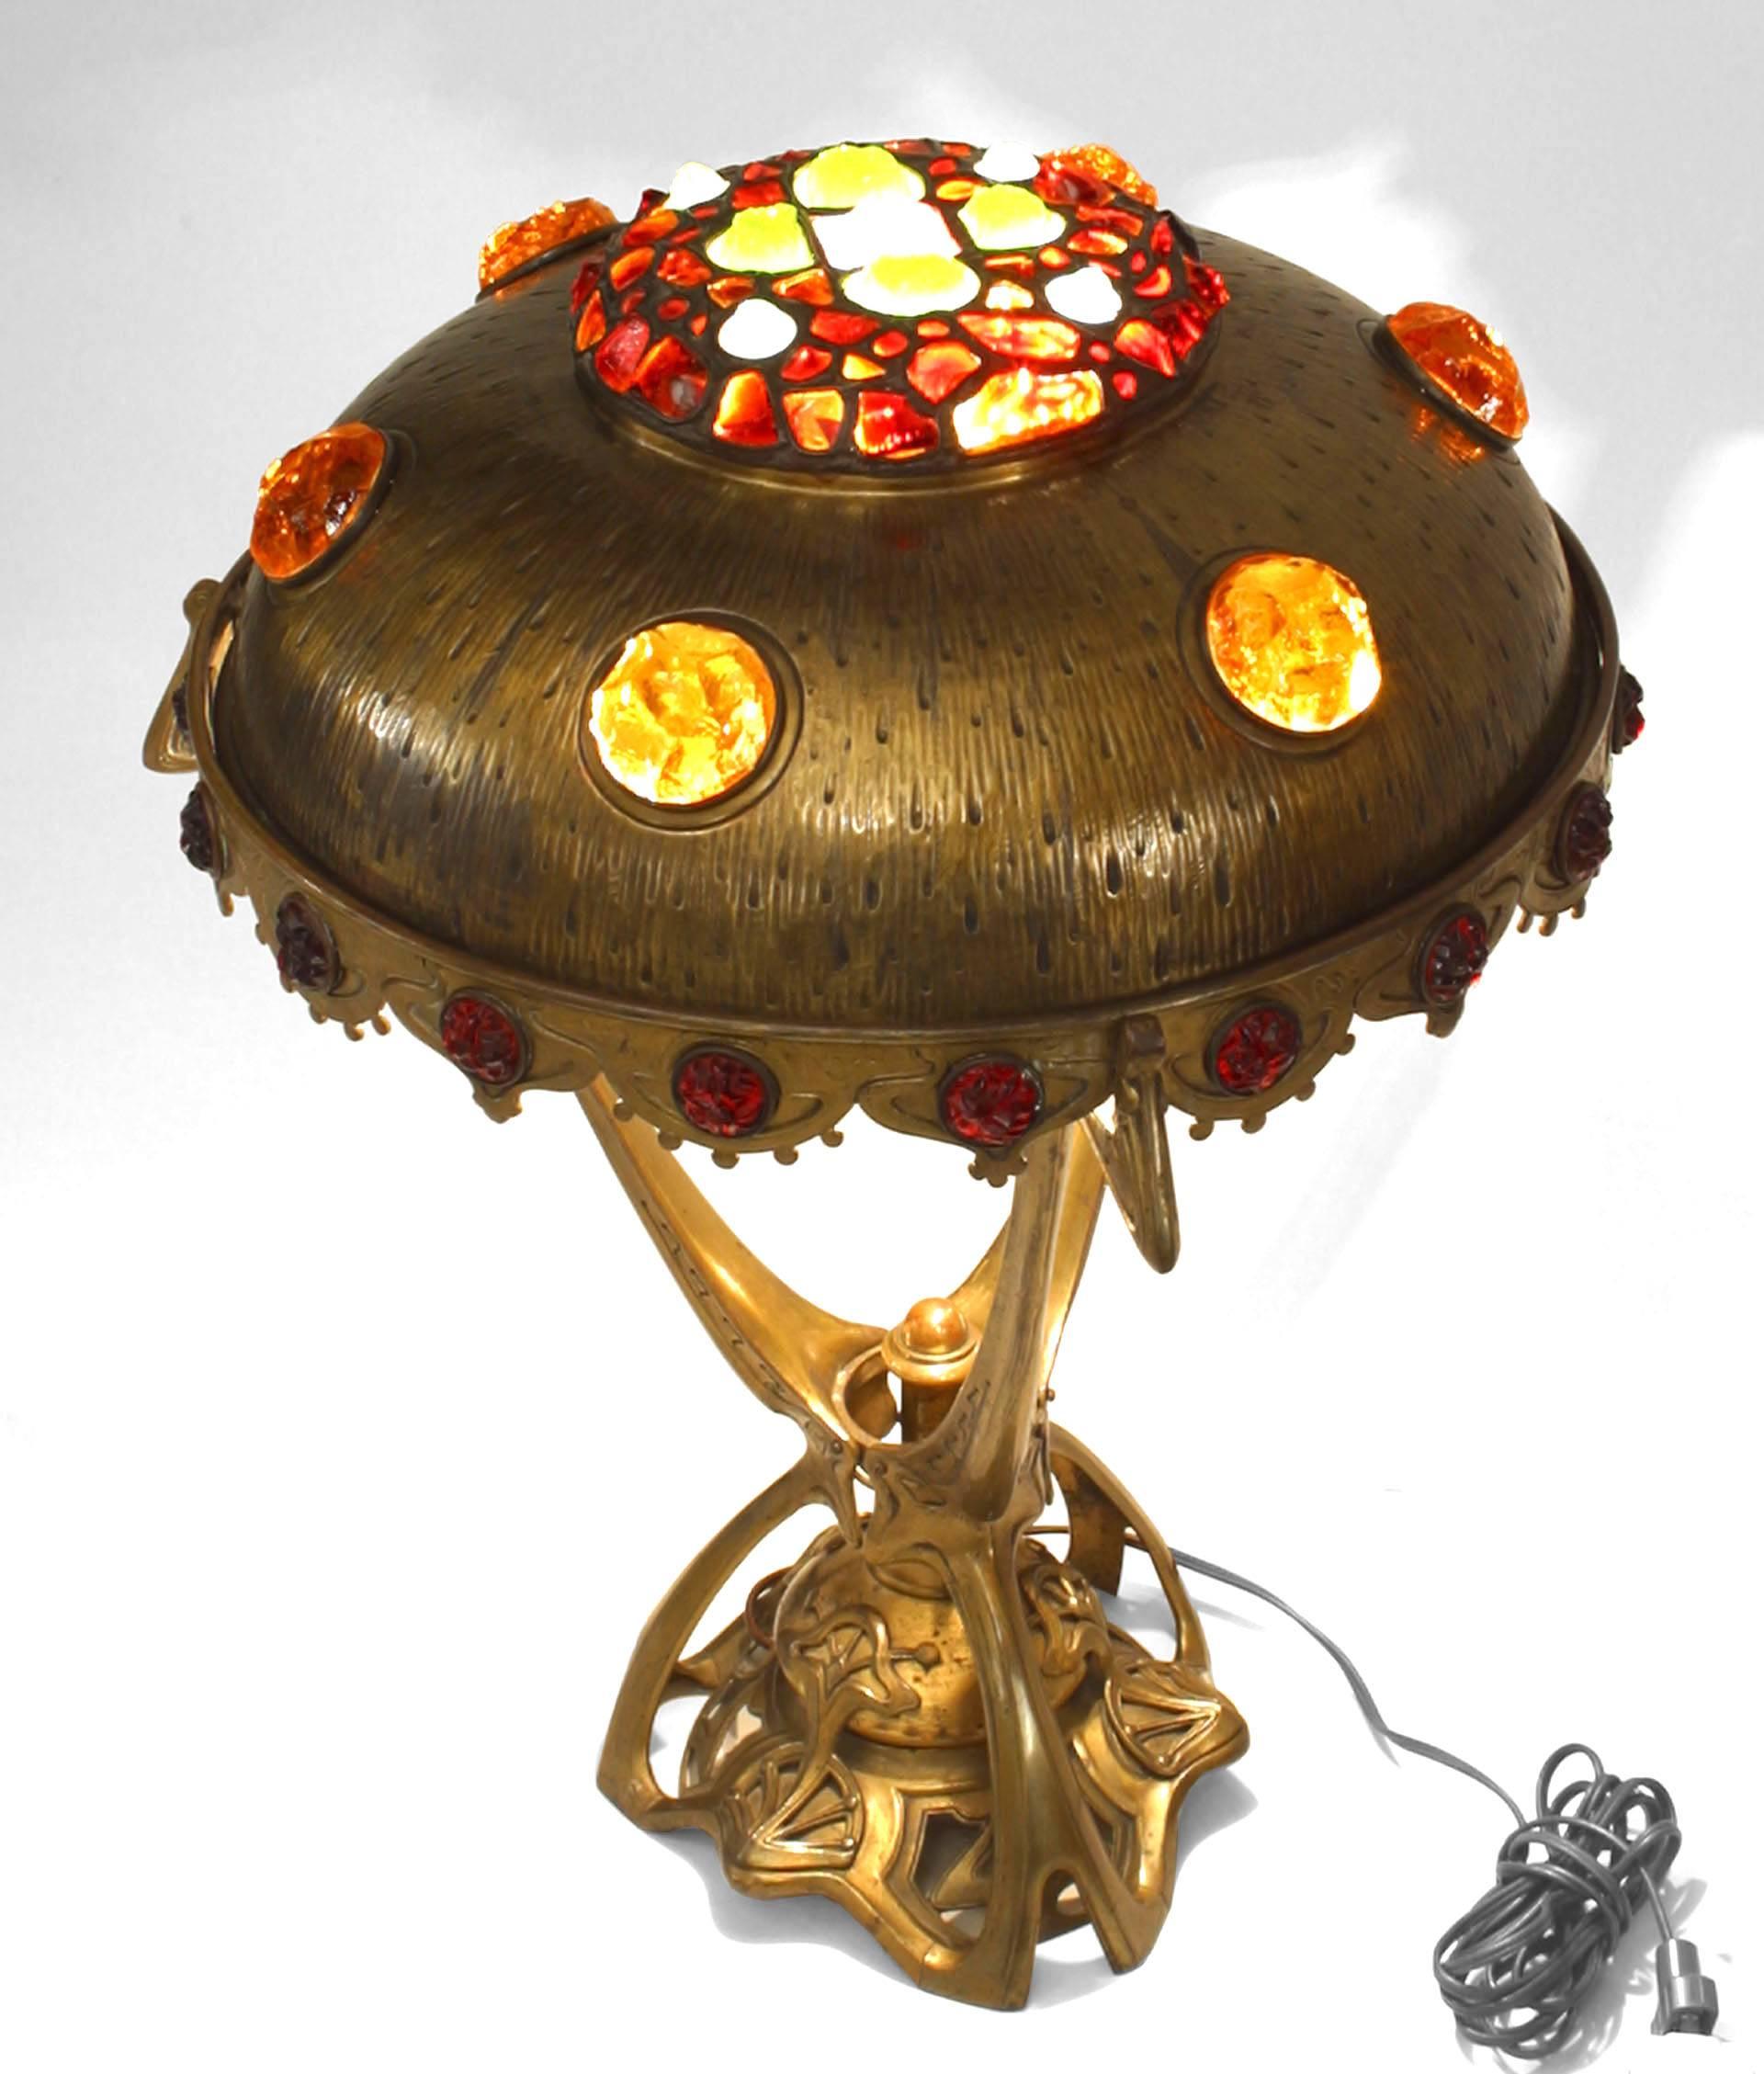 Art Nouveau (Hungarian) brass table lamp with a multicolored glass jewel encrusted shade with 3 supports on a filigree base.
